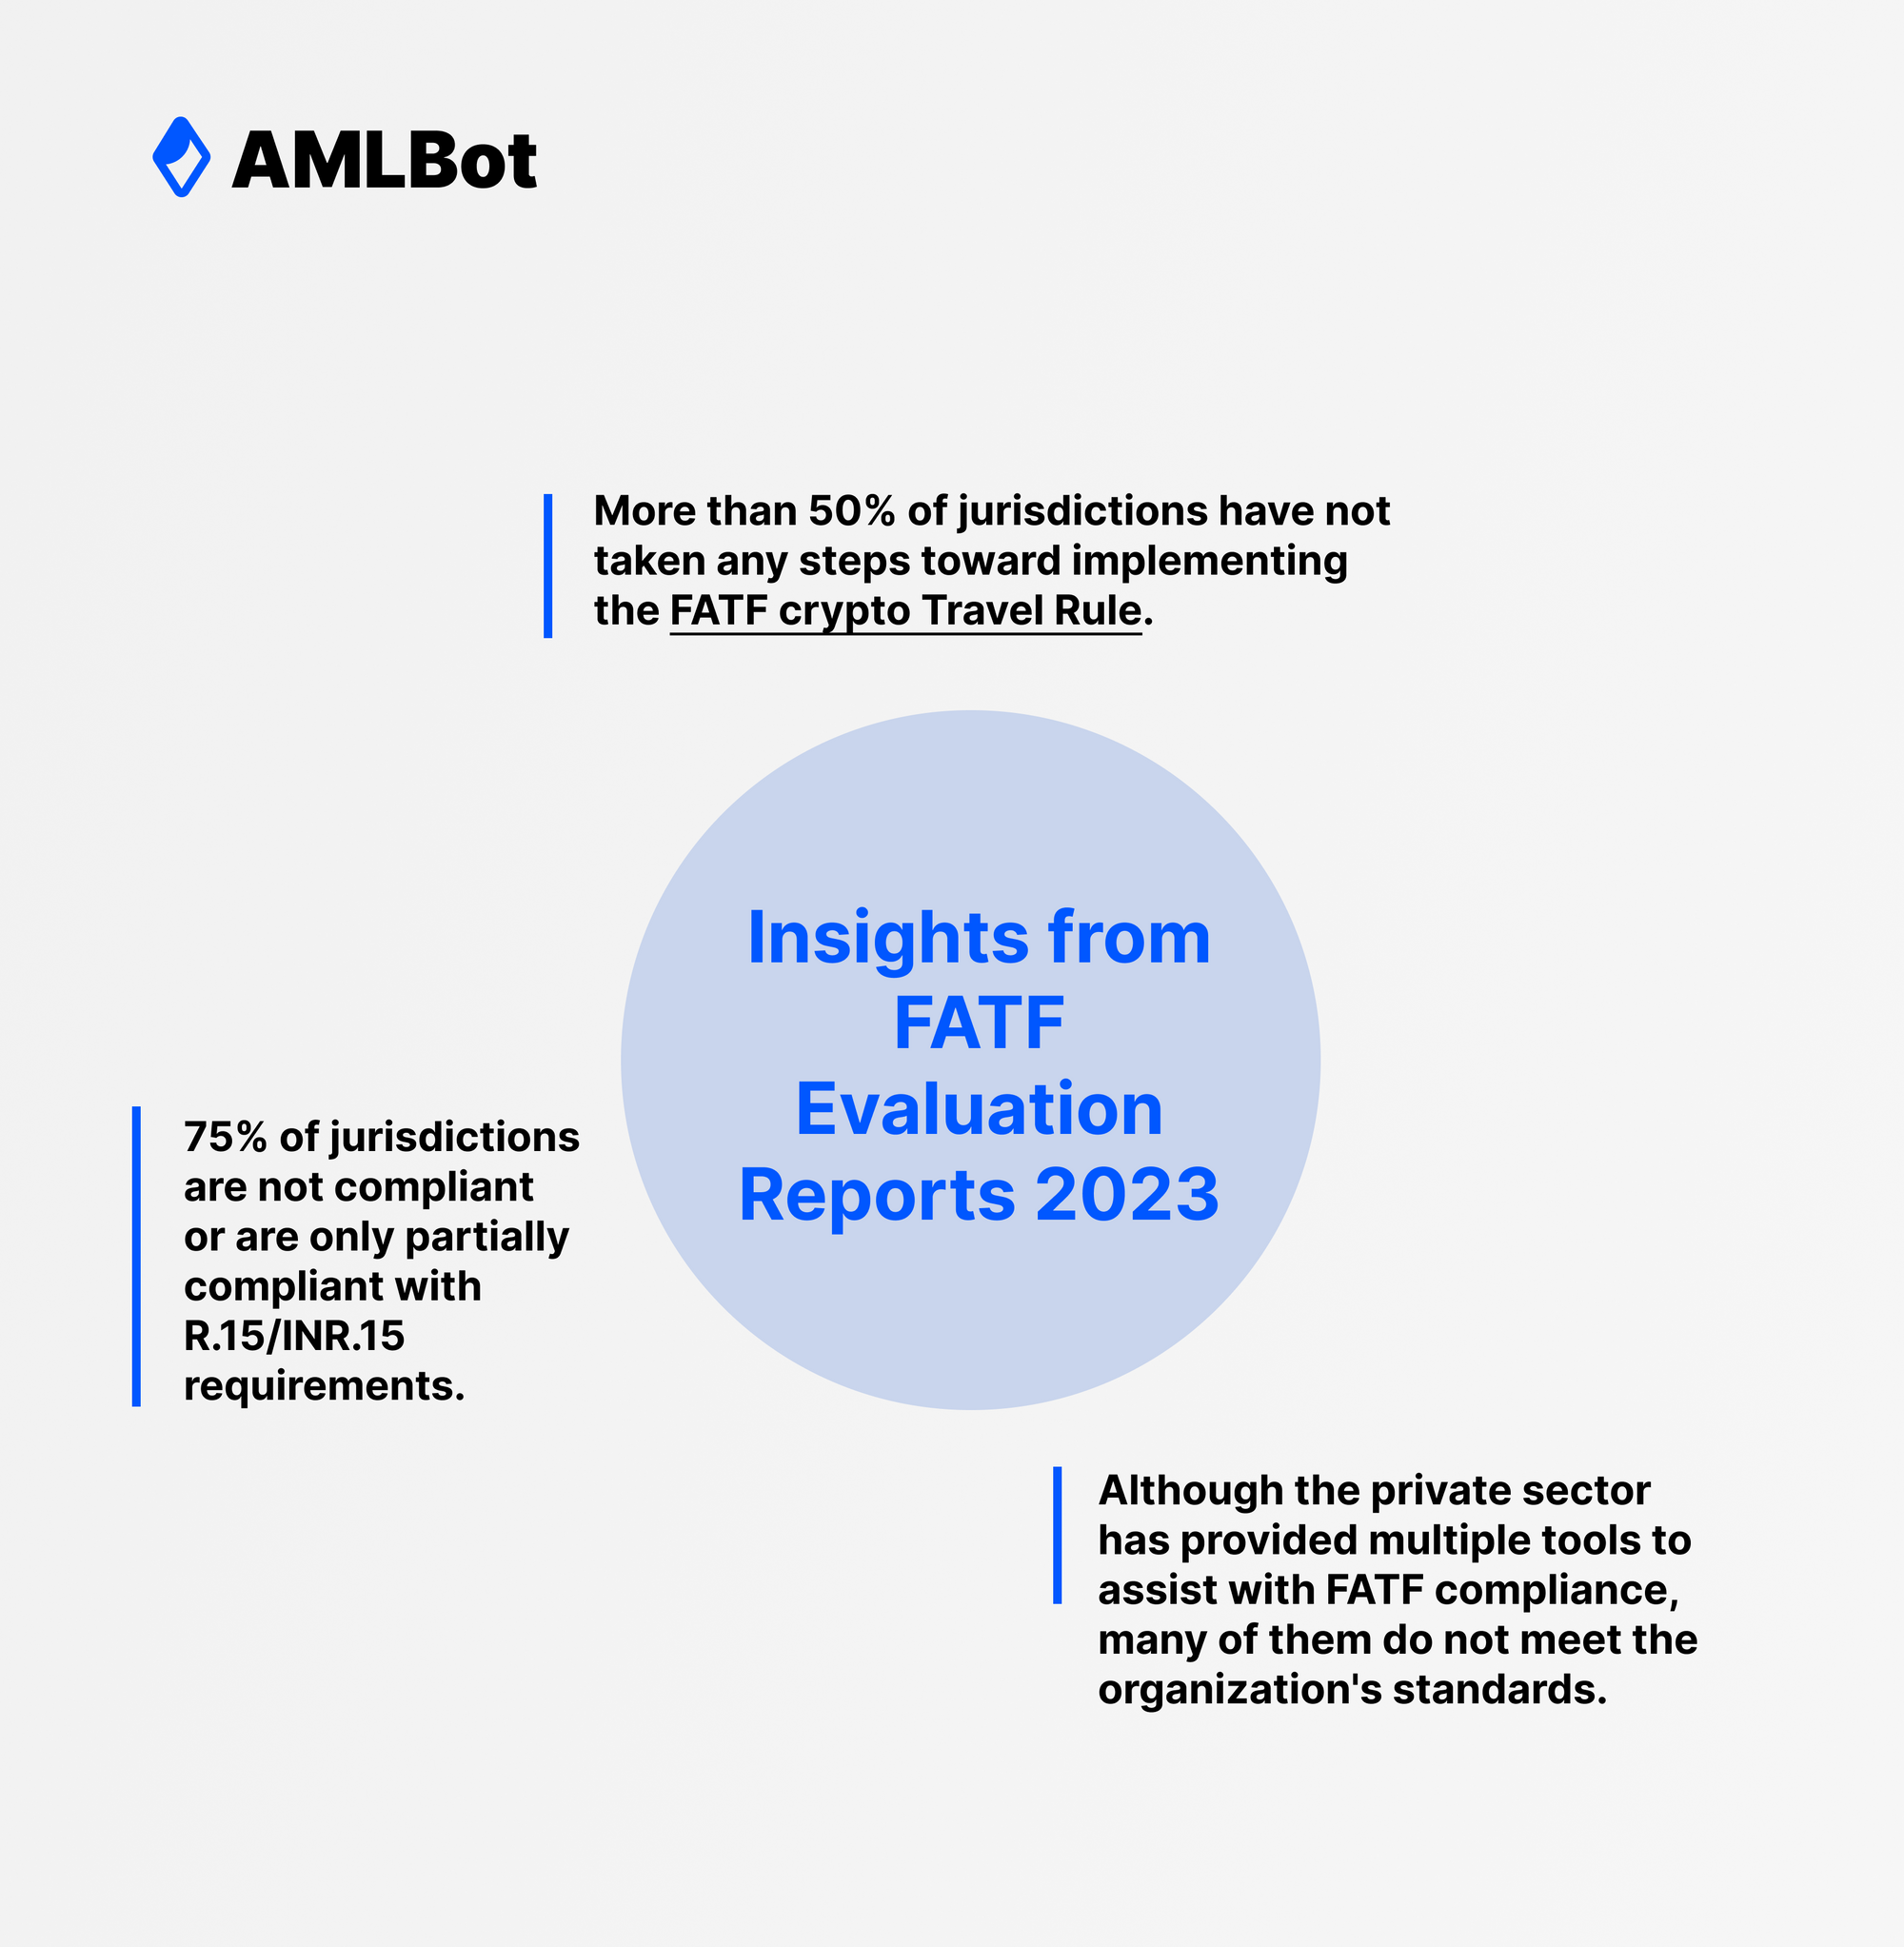 insights from FATF Evaluation Reports 2023